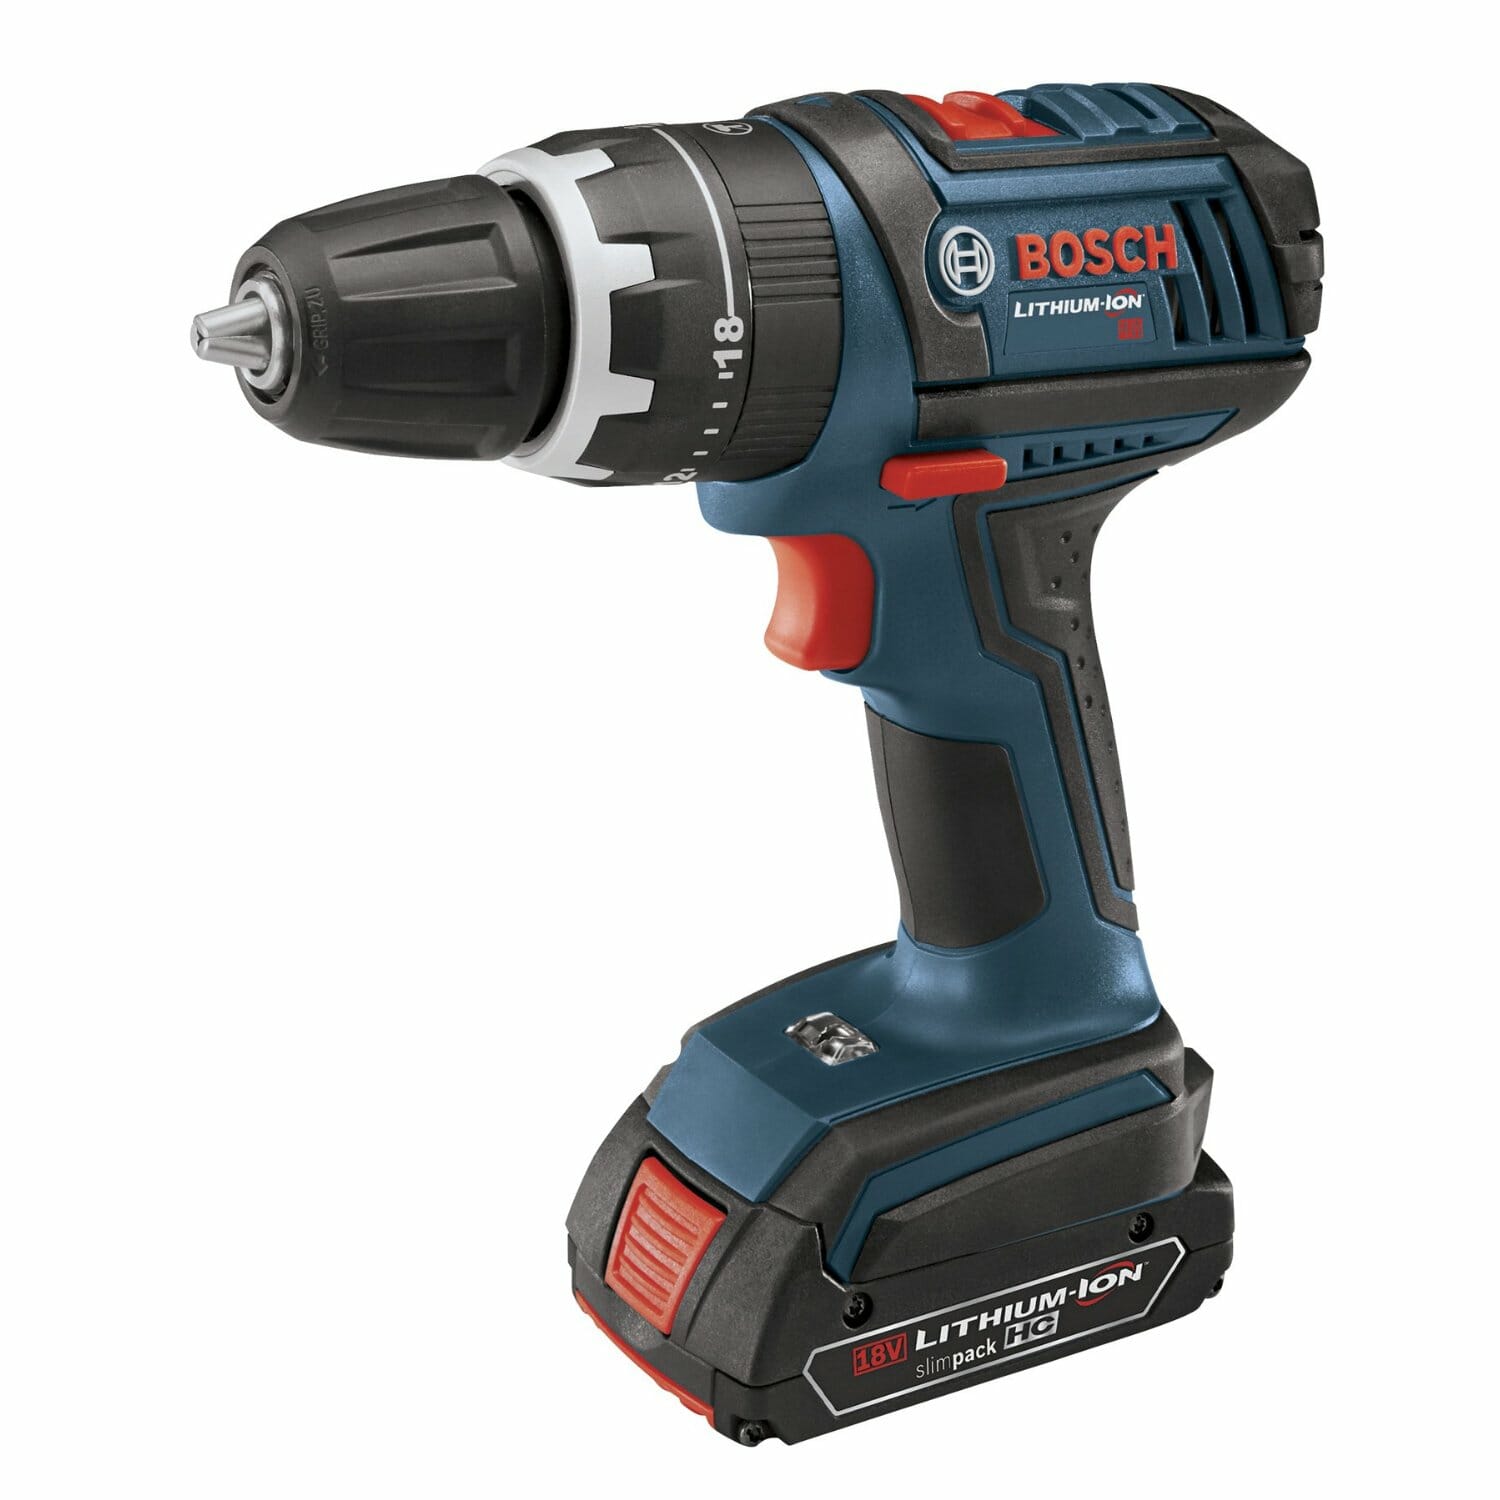 What are some top-rated cordless drill drivers?